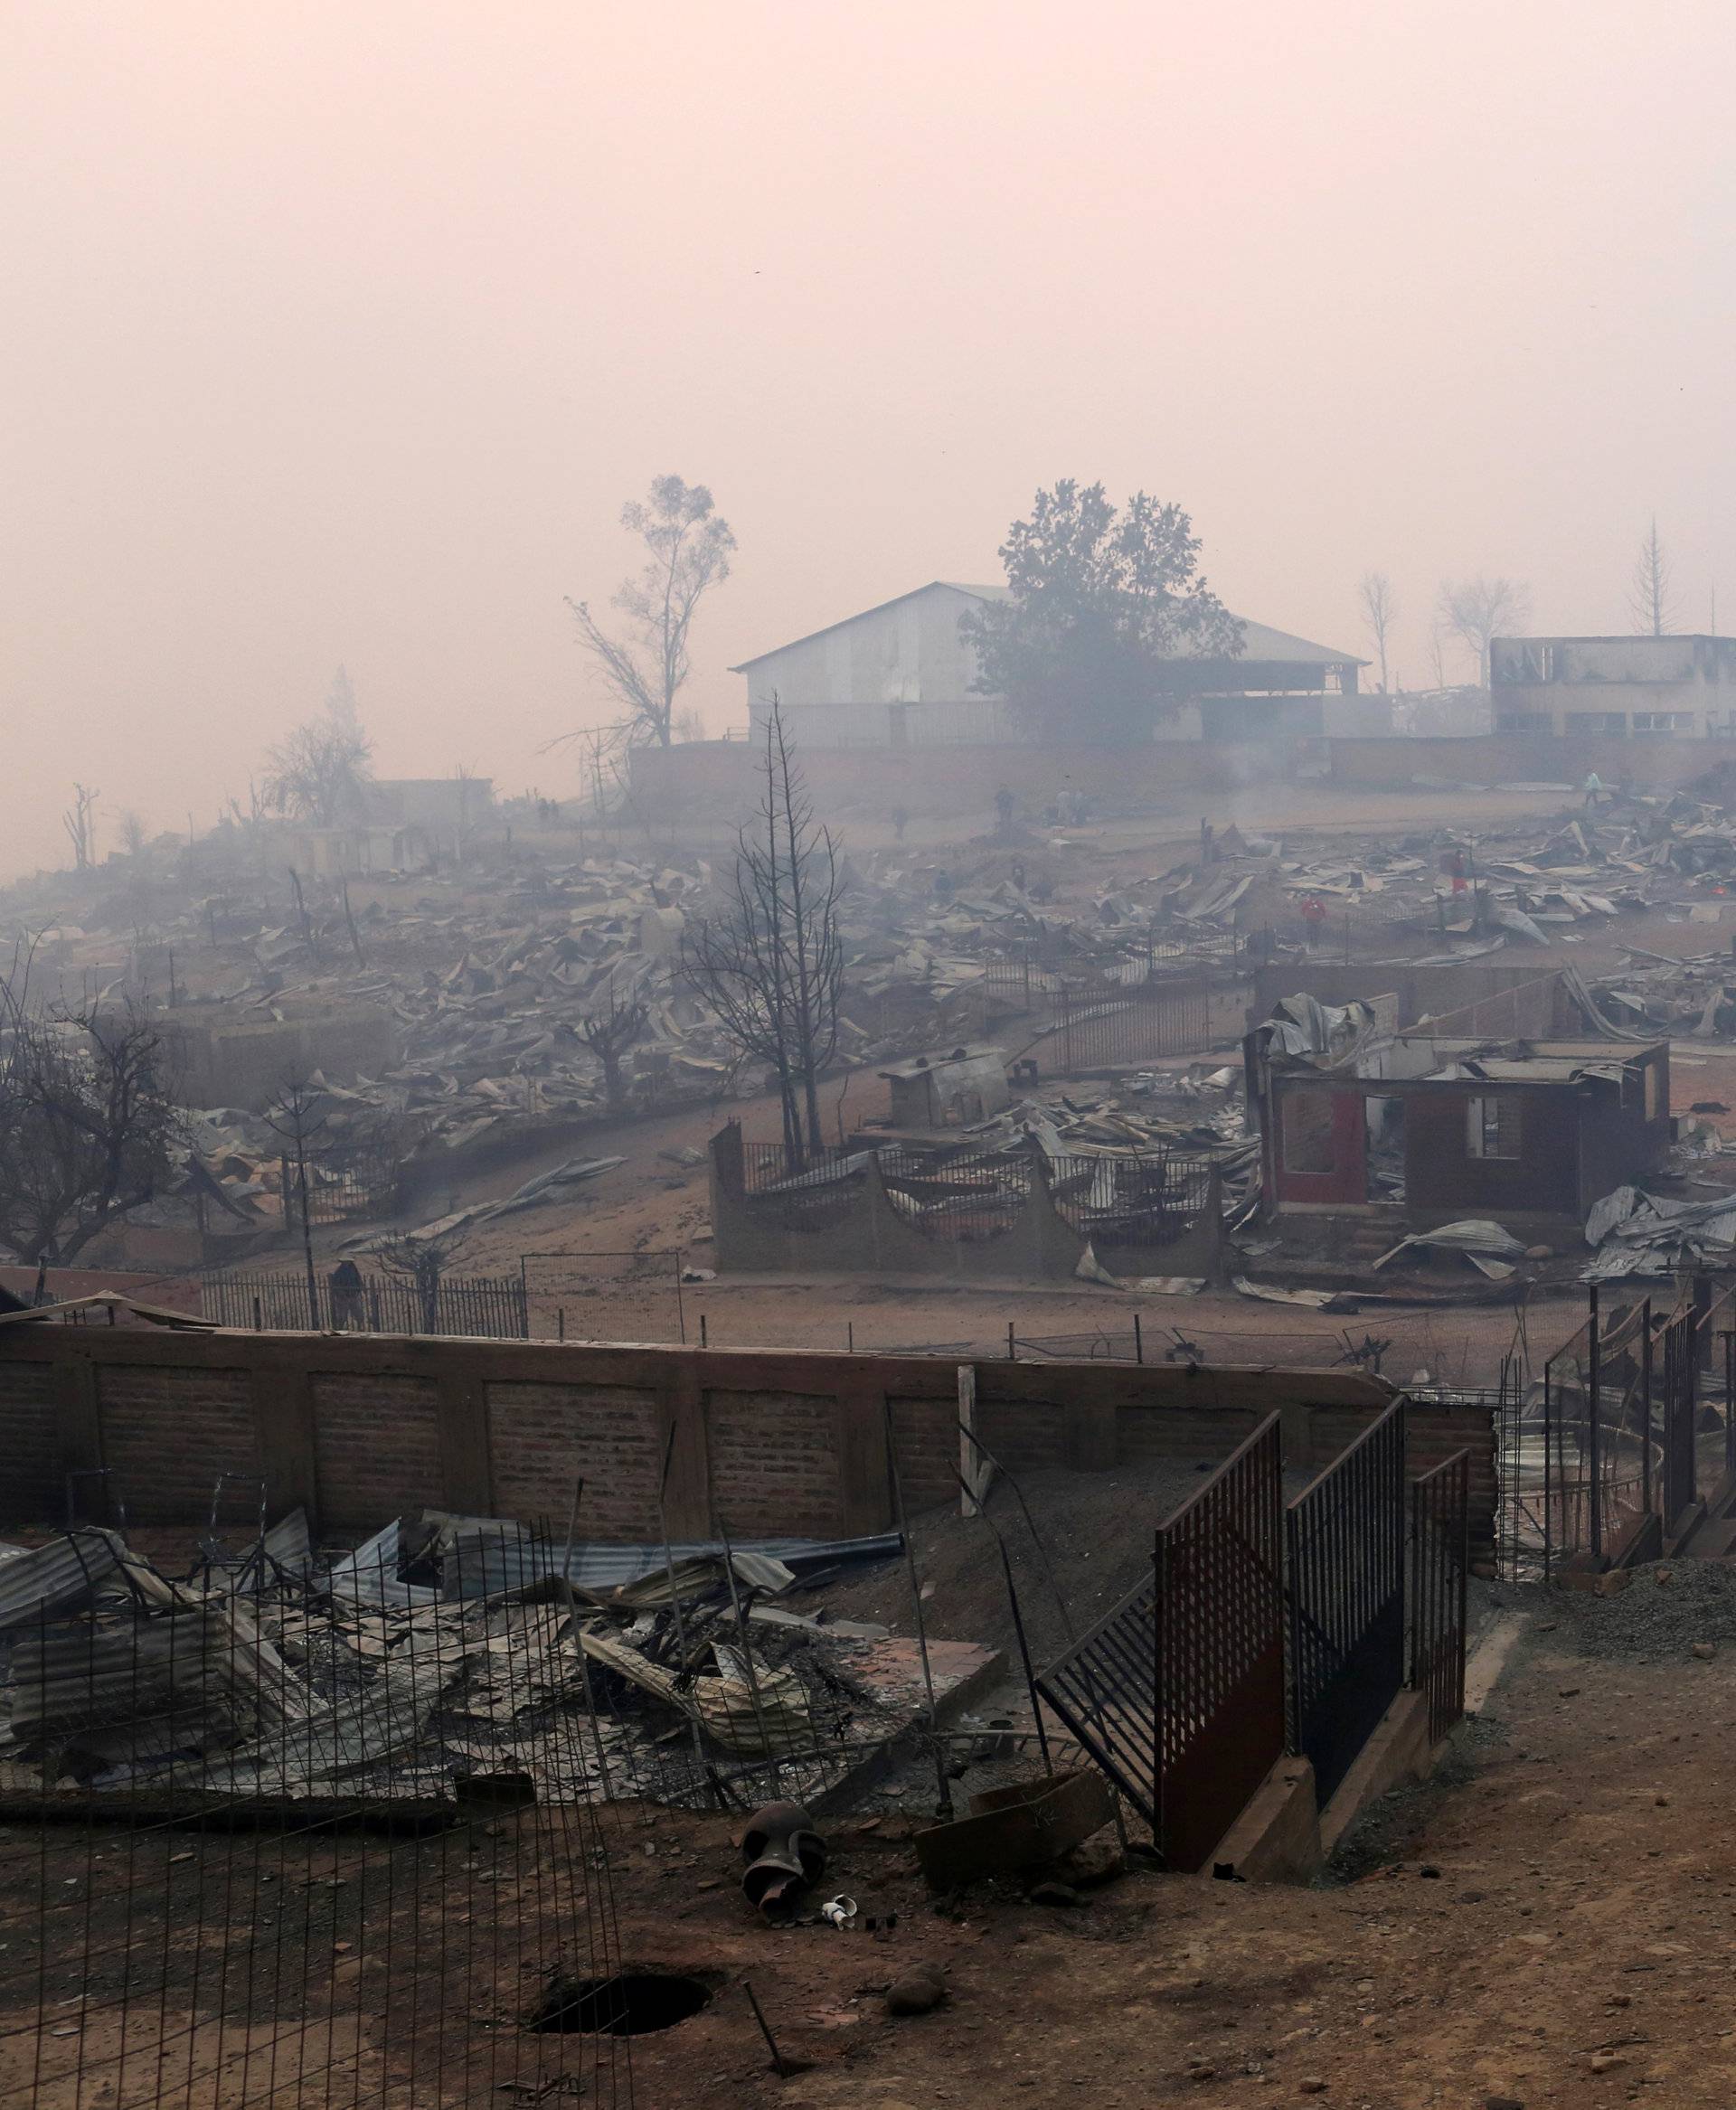 People hug while standing next to burnt houses as the worst wildfires in Chile's modern history ravage wide swaths of the country's central-south regions, in Santa Olga